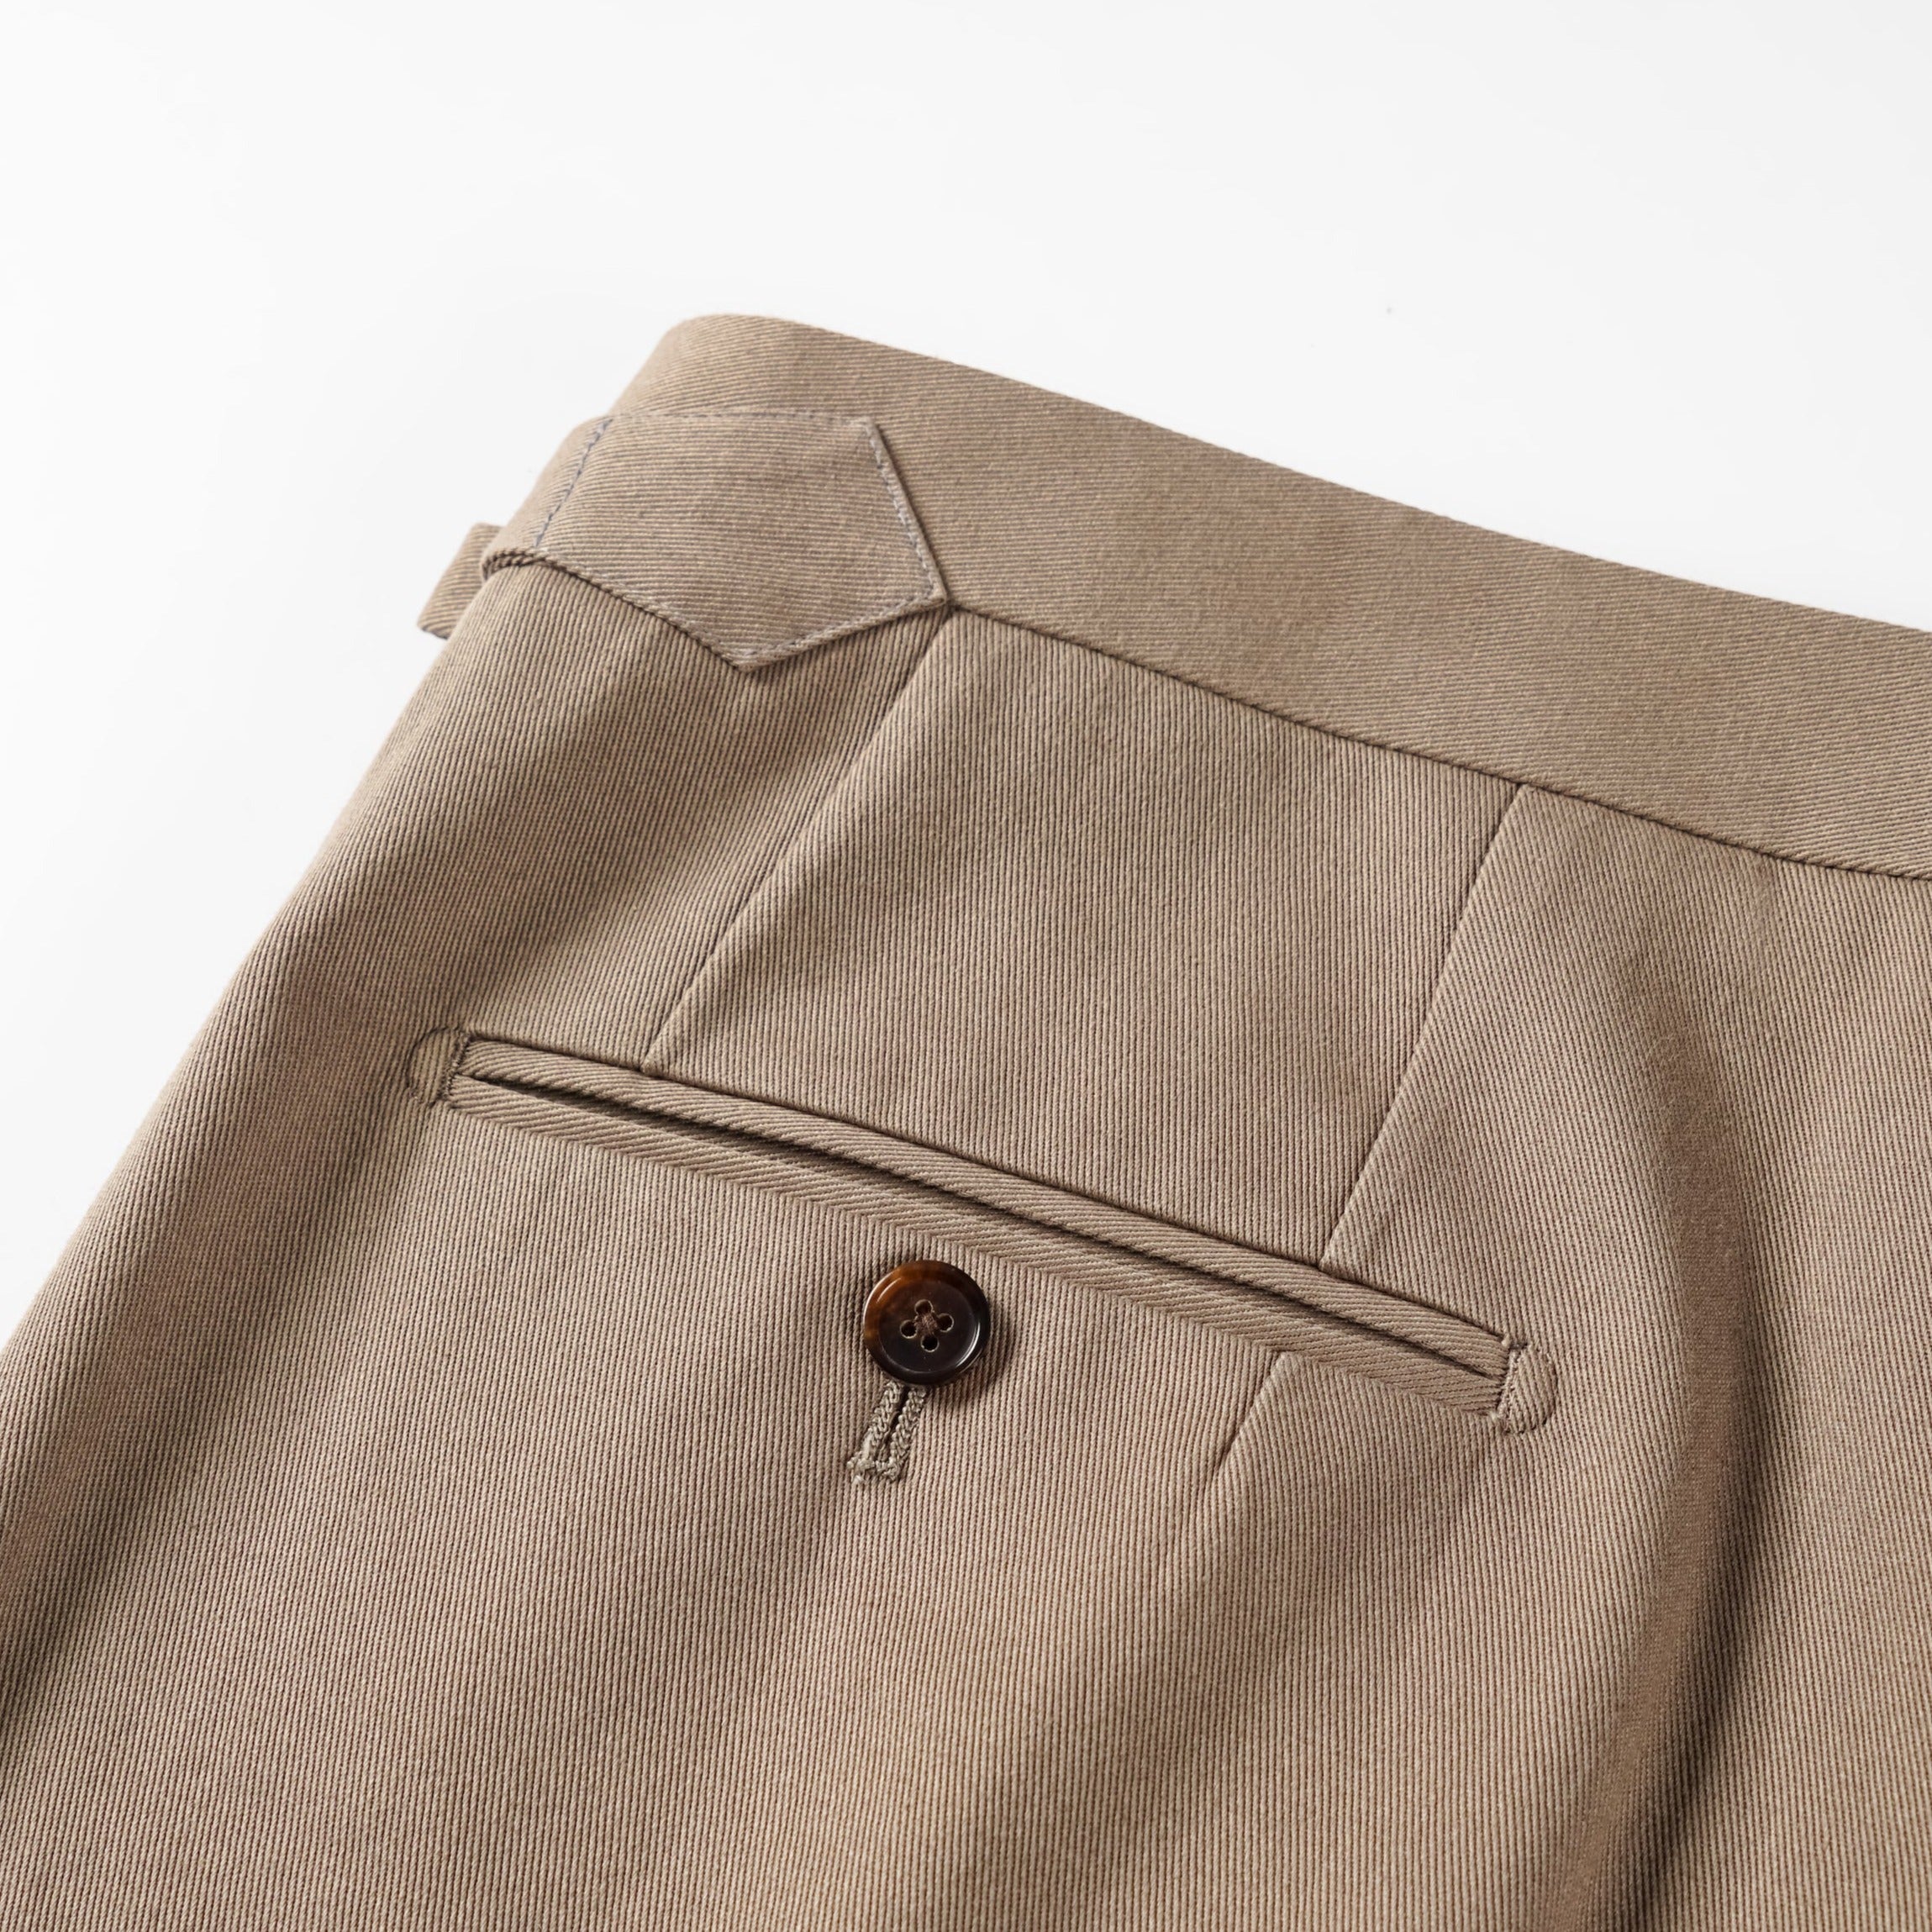 TWILL COTTON TROUSERS by BRISBANE MOSS   Trousers   Germain Tailors